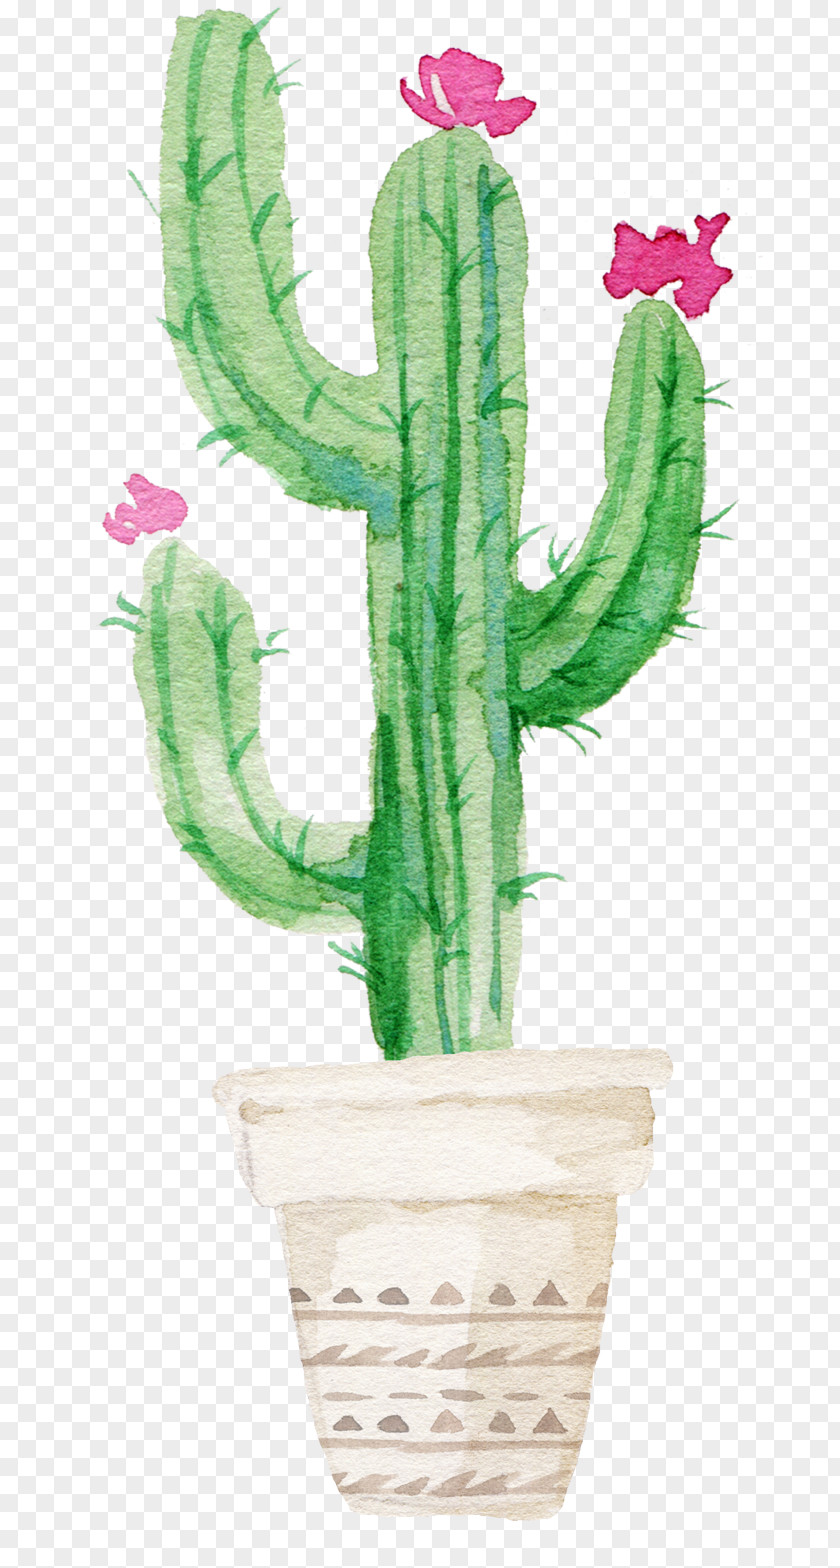 Cactus Cacti And Succulents & Watercolor Painting Succulent Plant PNG